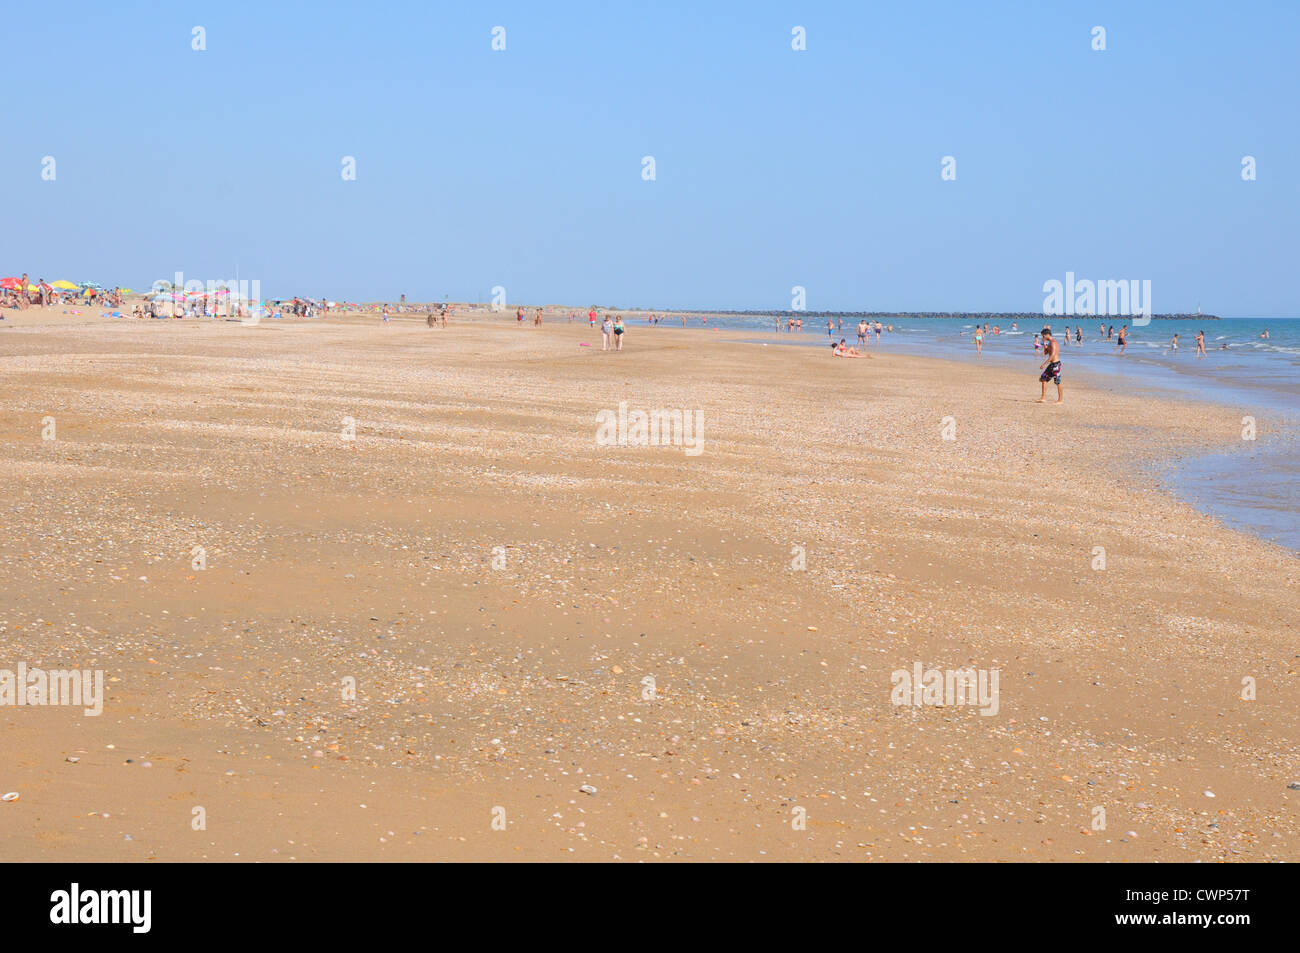 Wide expanse of golden sandy beach, holidaymakers in distance, blue sky, hot midday sun, Costa de la Luz. Stock Photo